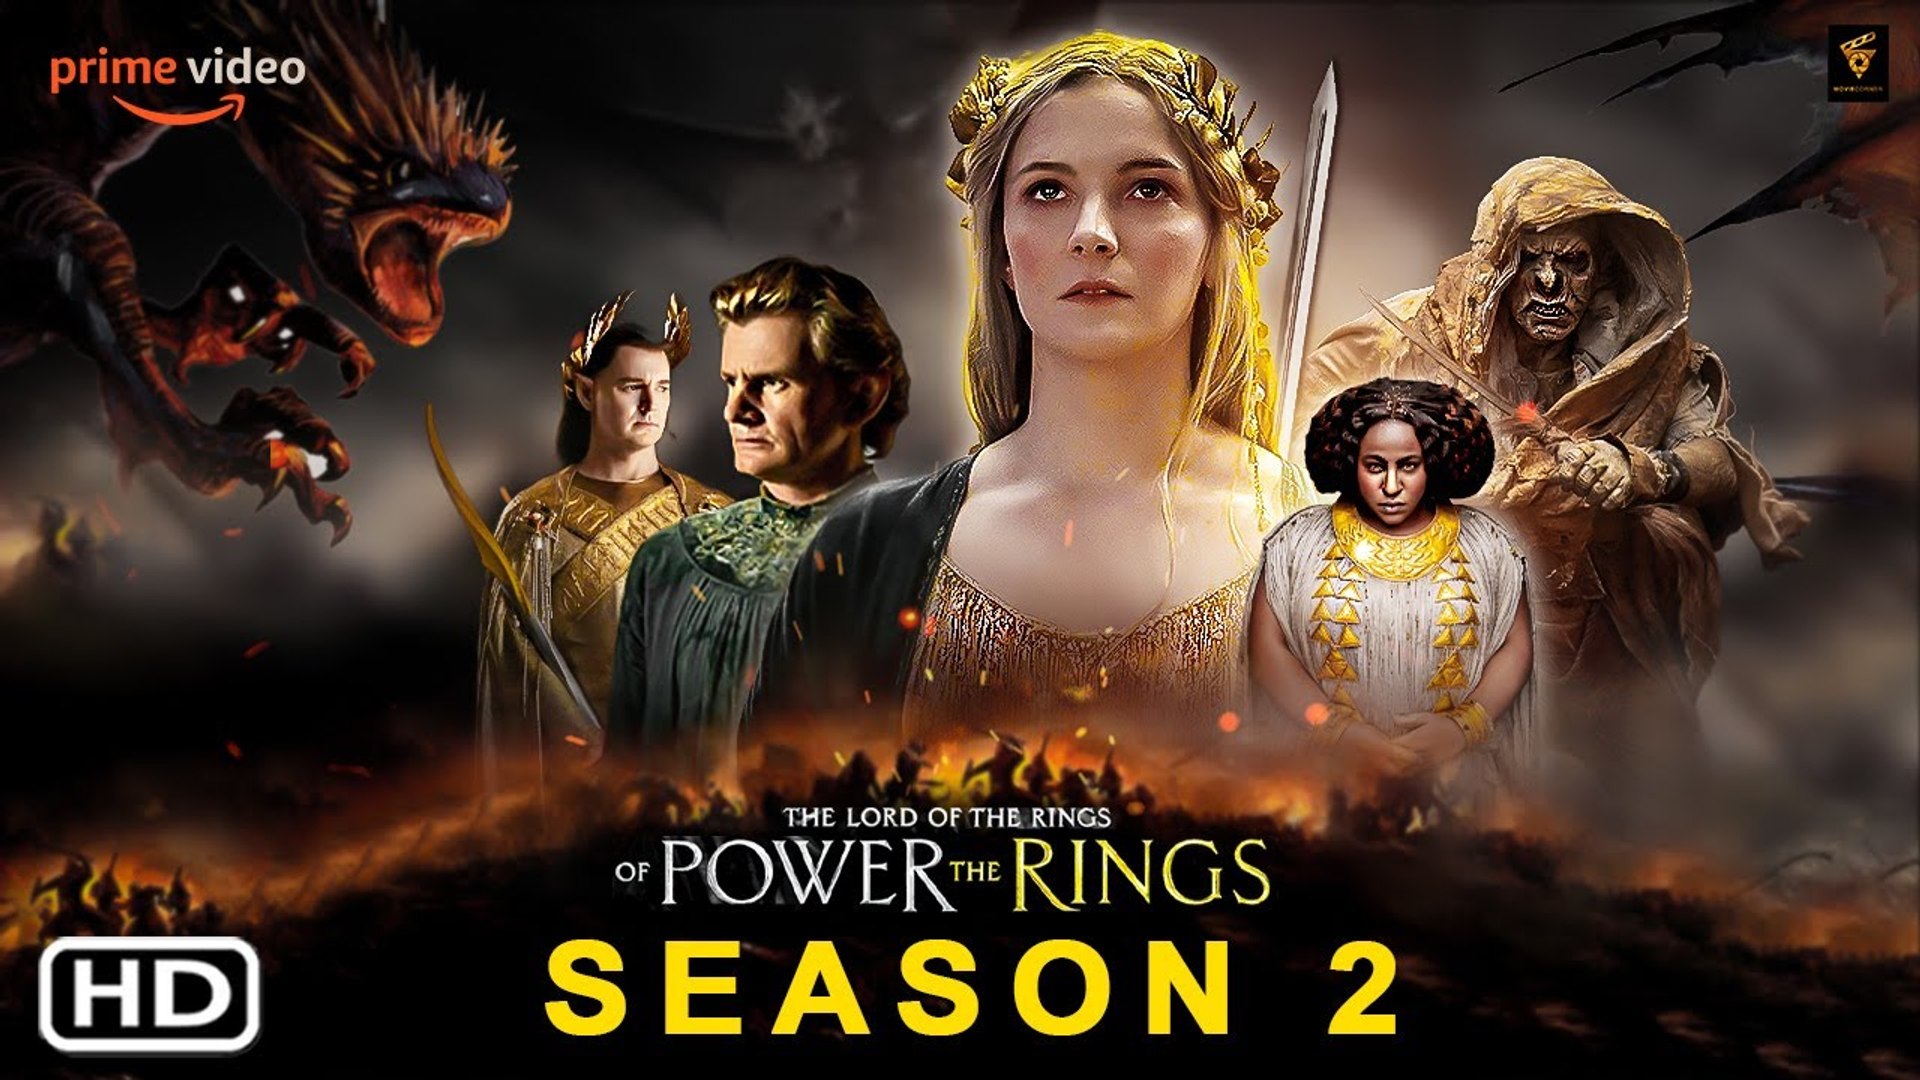 What to Expect from The Rings of Power Season 2